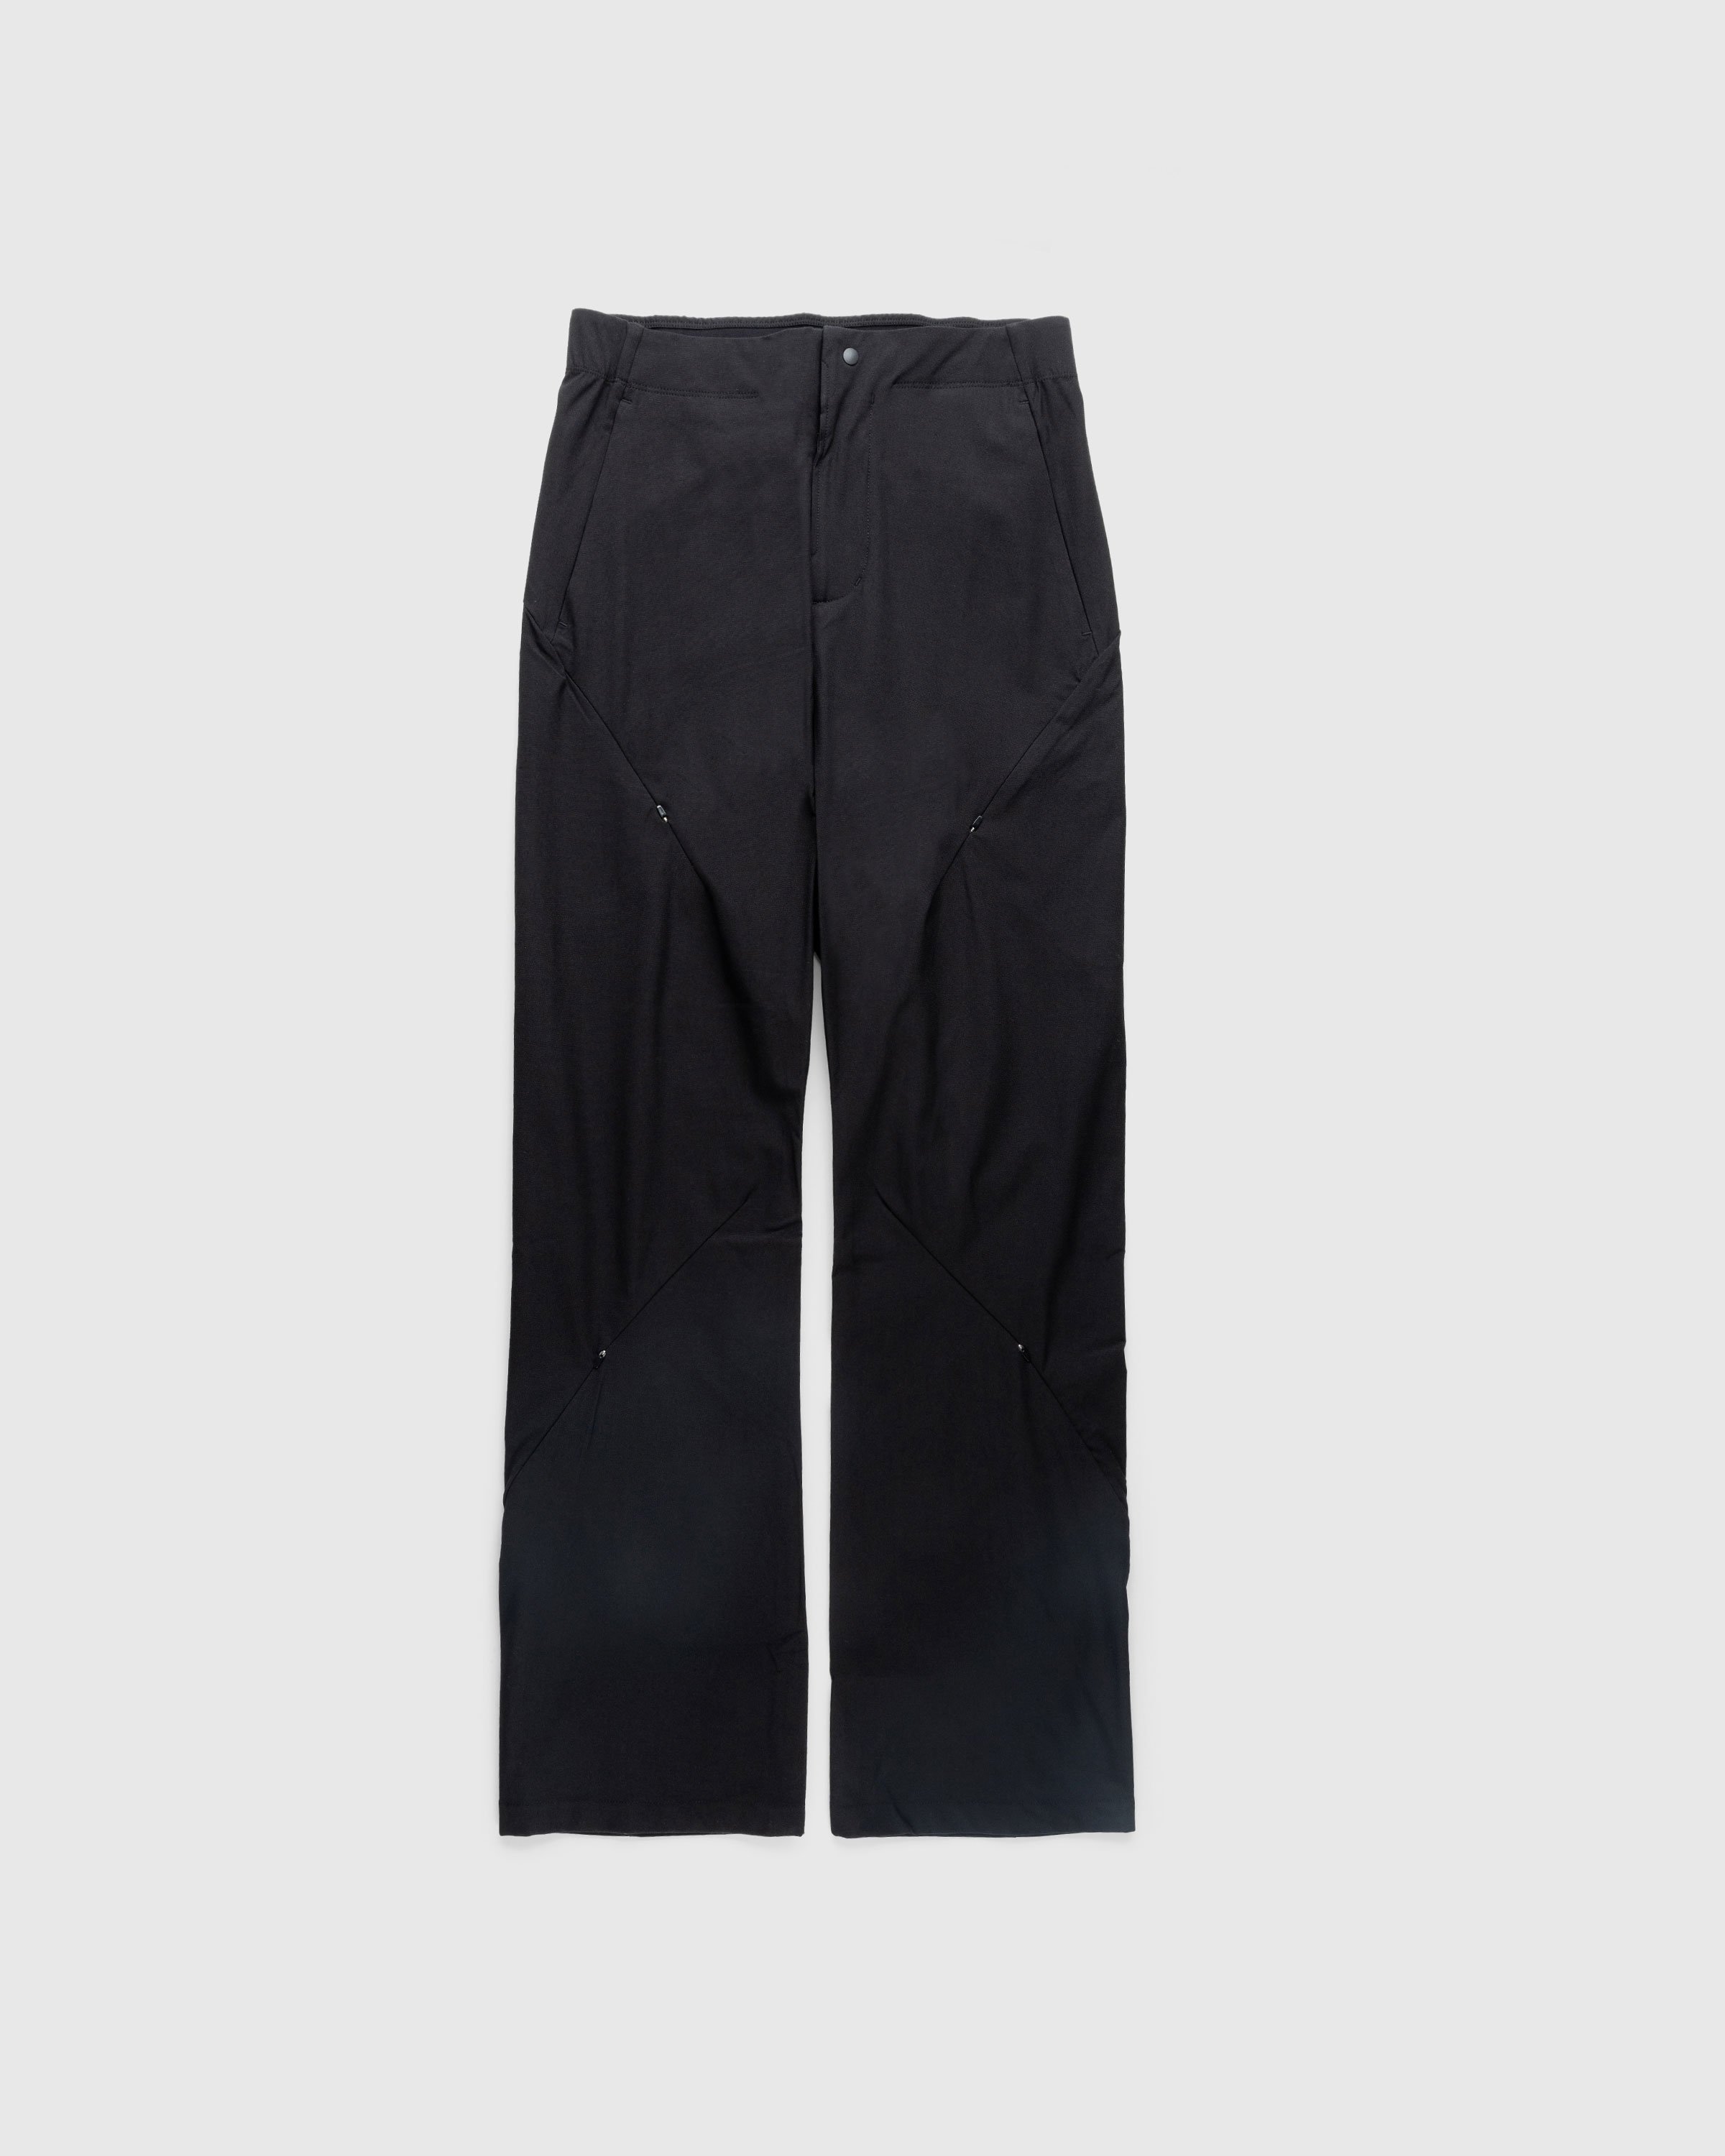 Post Archive Faction (PAF) - 5.1 Technical Pants Right Black - Clothing - Black - Image 1